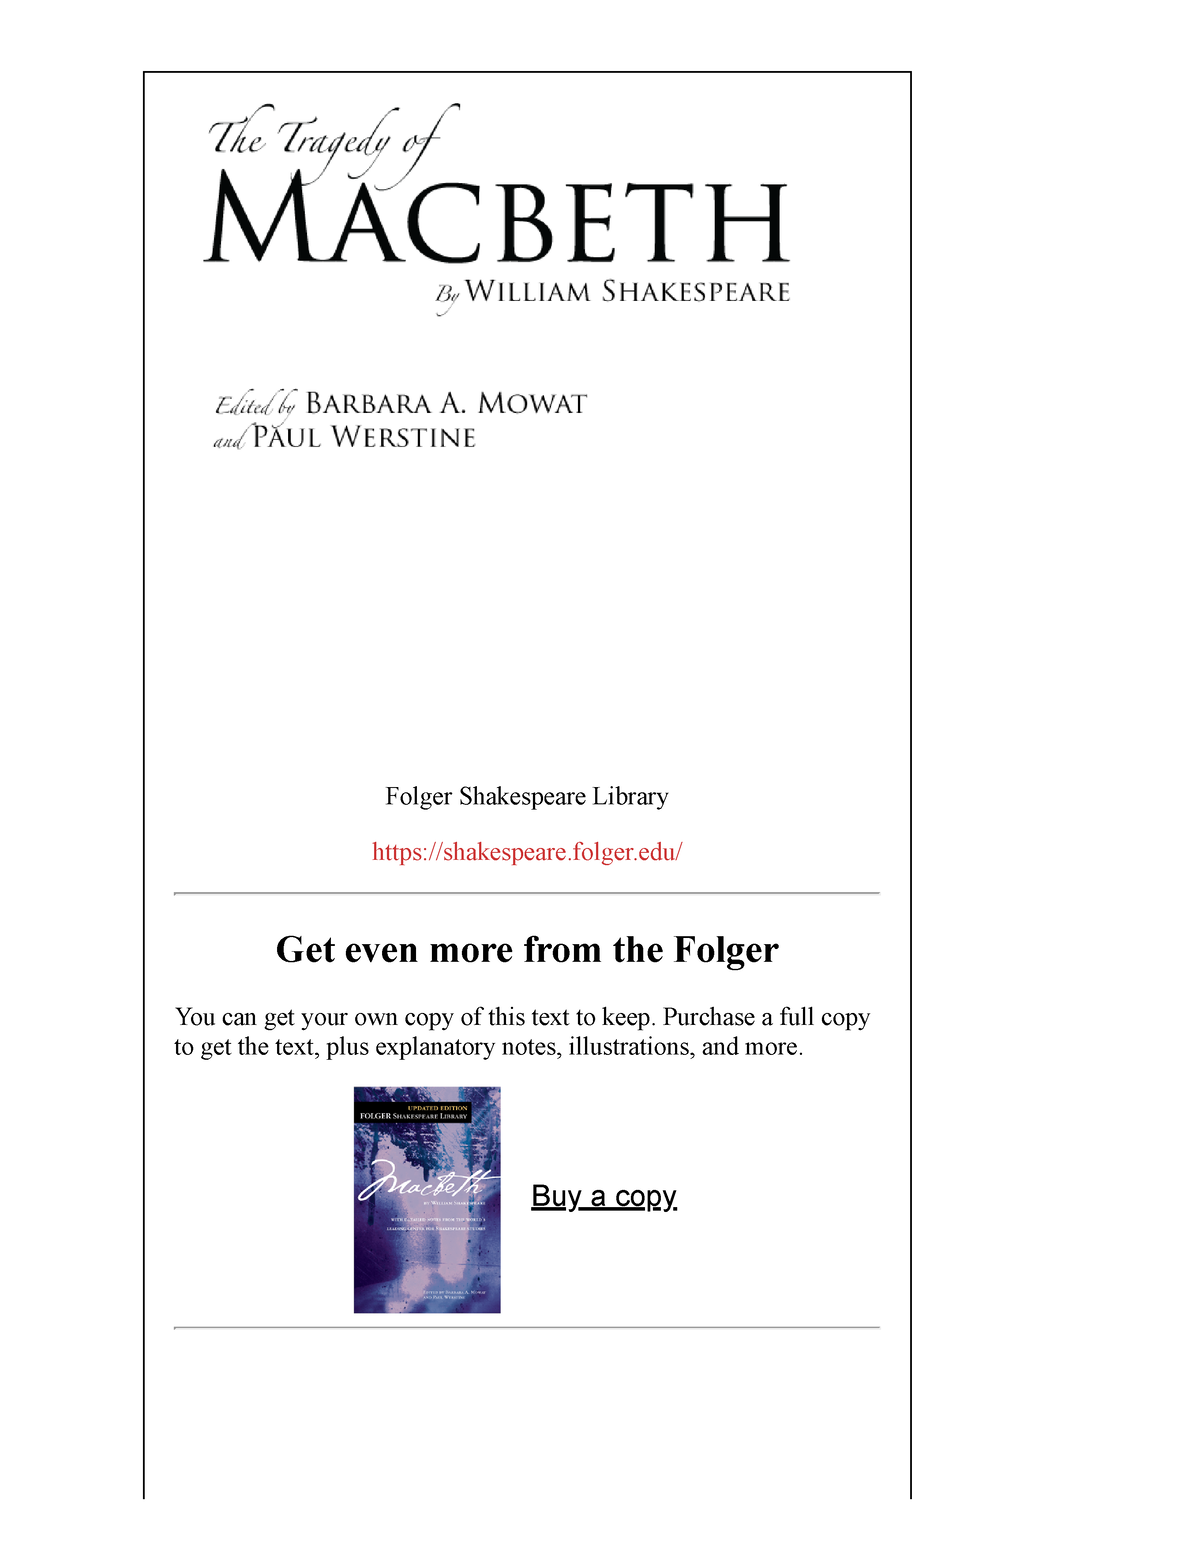 macbeth-pdf-folger-shakespeare-get-even-more-from-the-folger-you-can